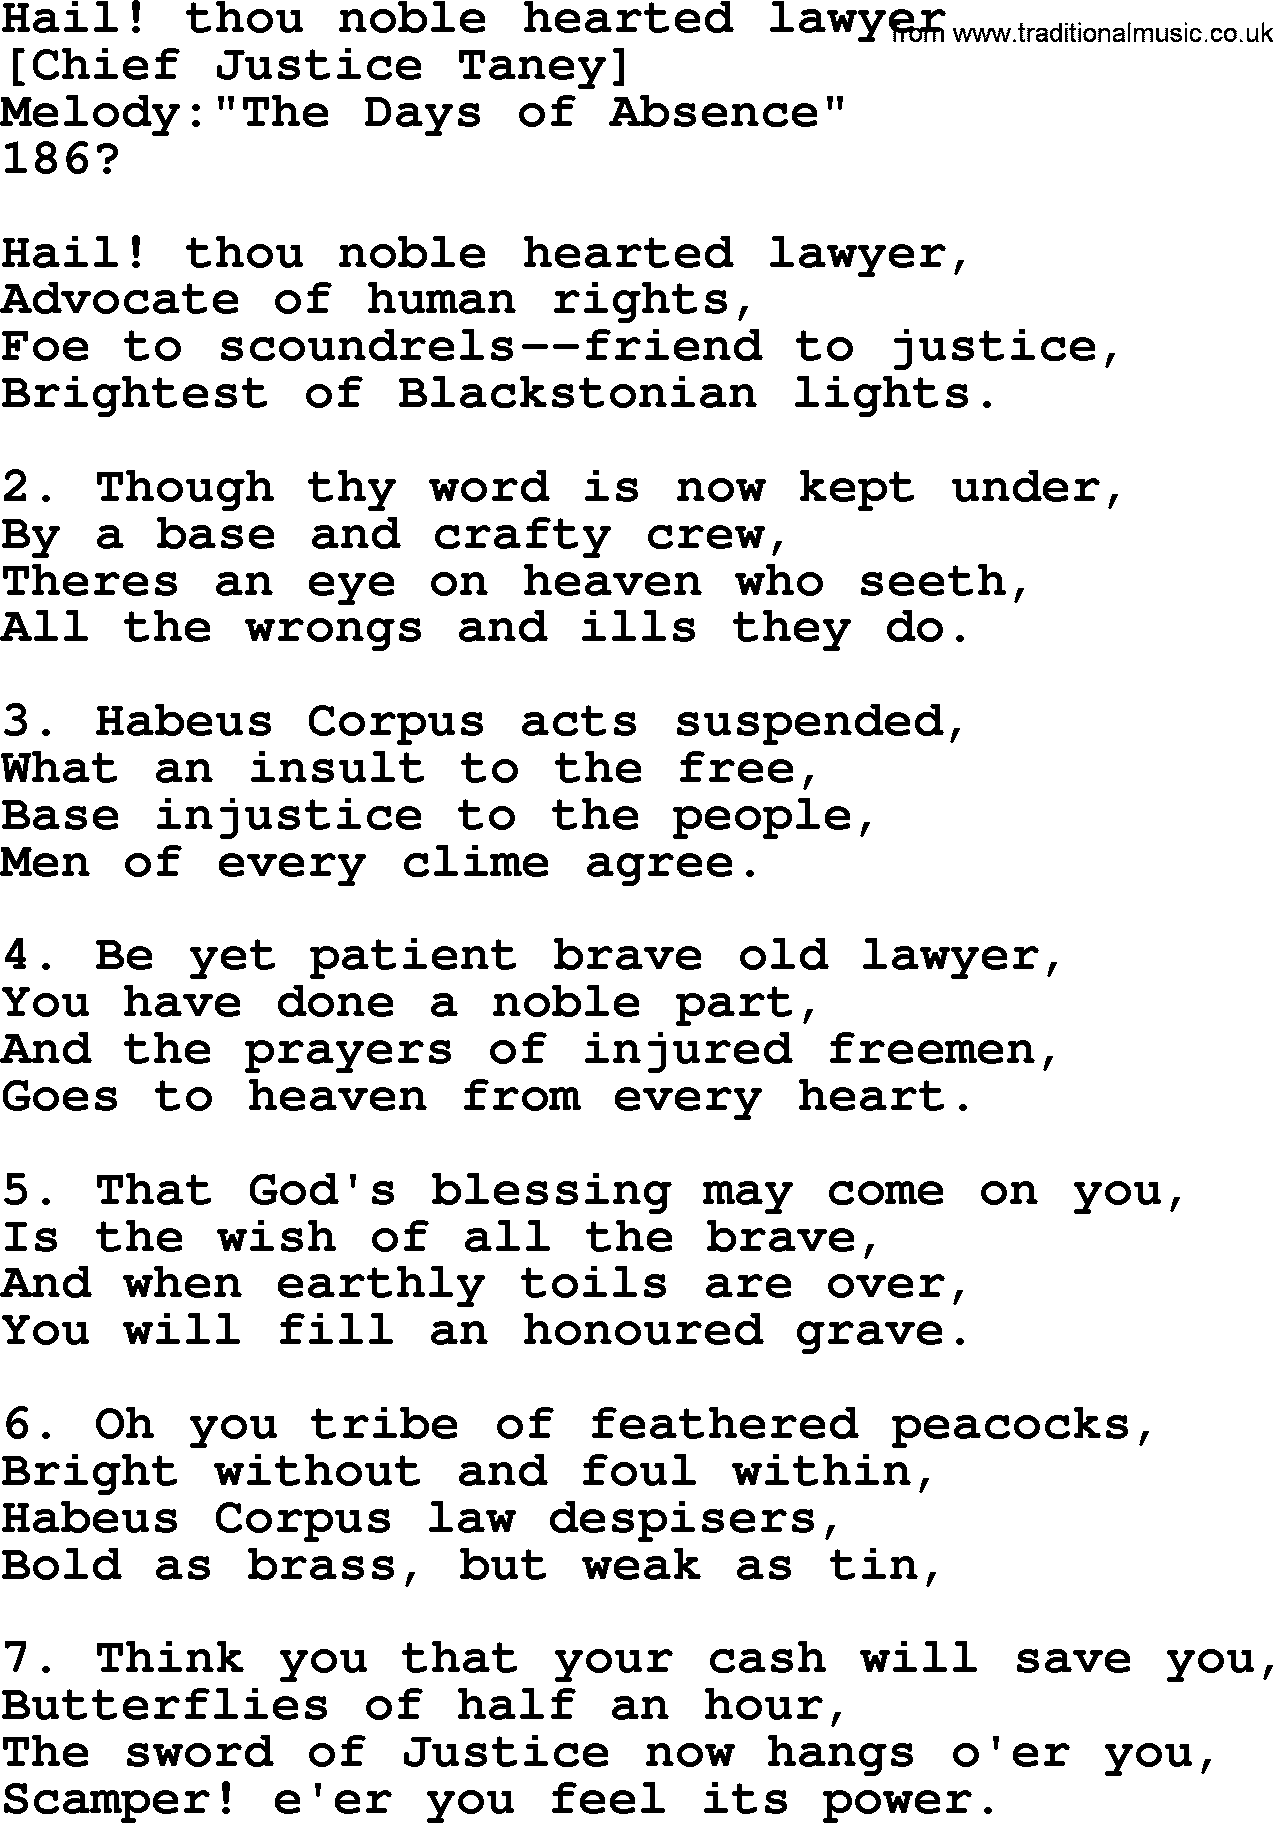 Old American Song: Hail! Thou Noble Hearted Lawyer, lyrics